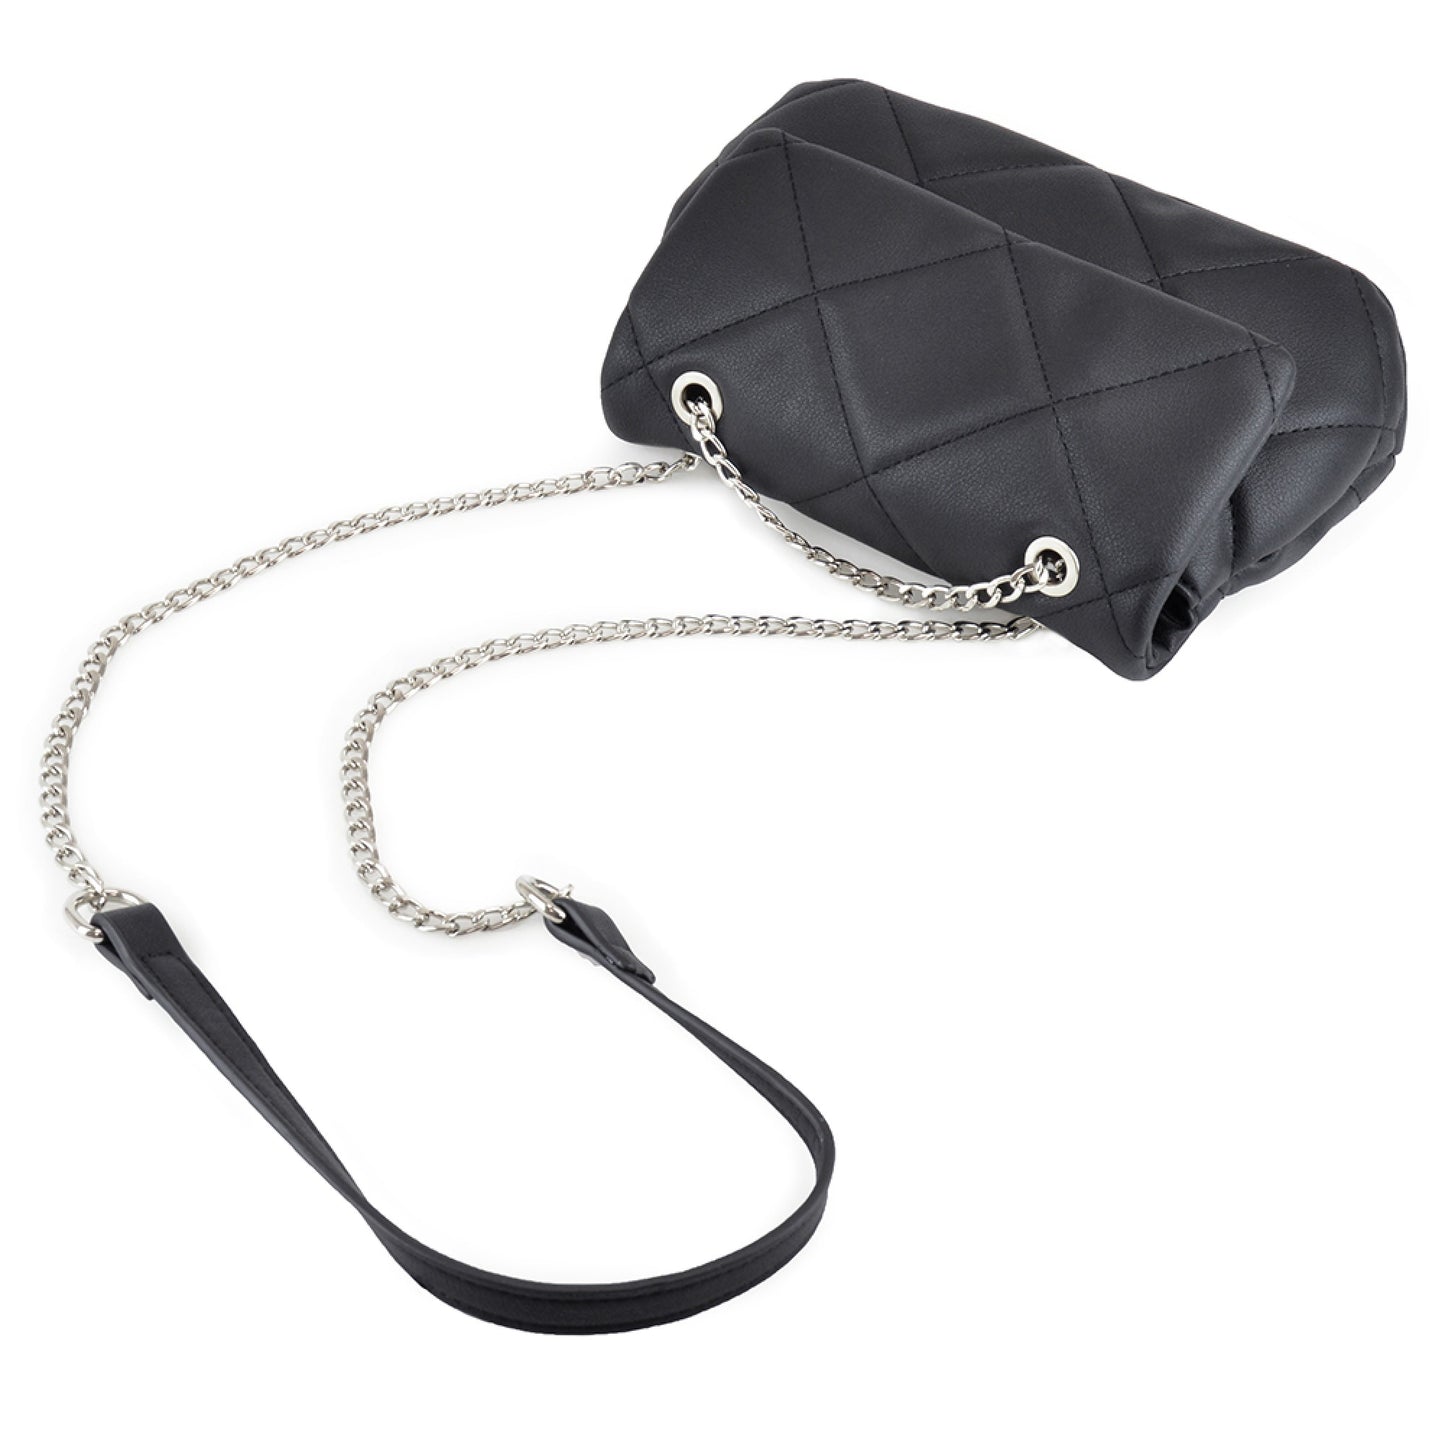 Ladies Versatile Black Quilted Cross Body Bag with Adjustable Chain Strap